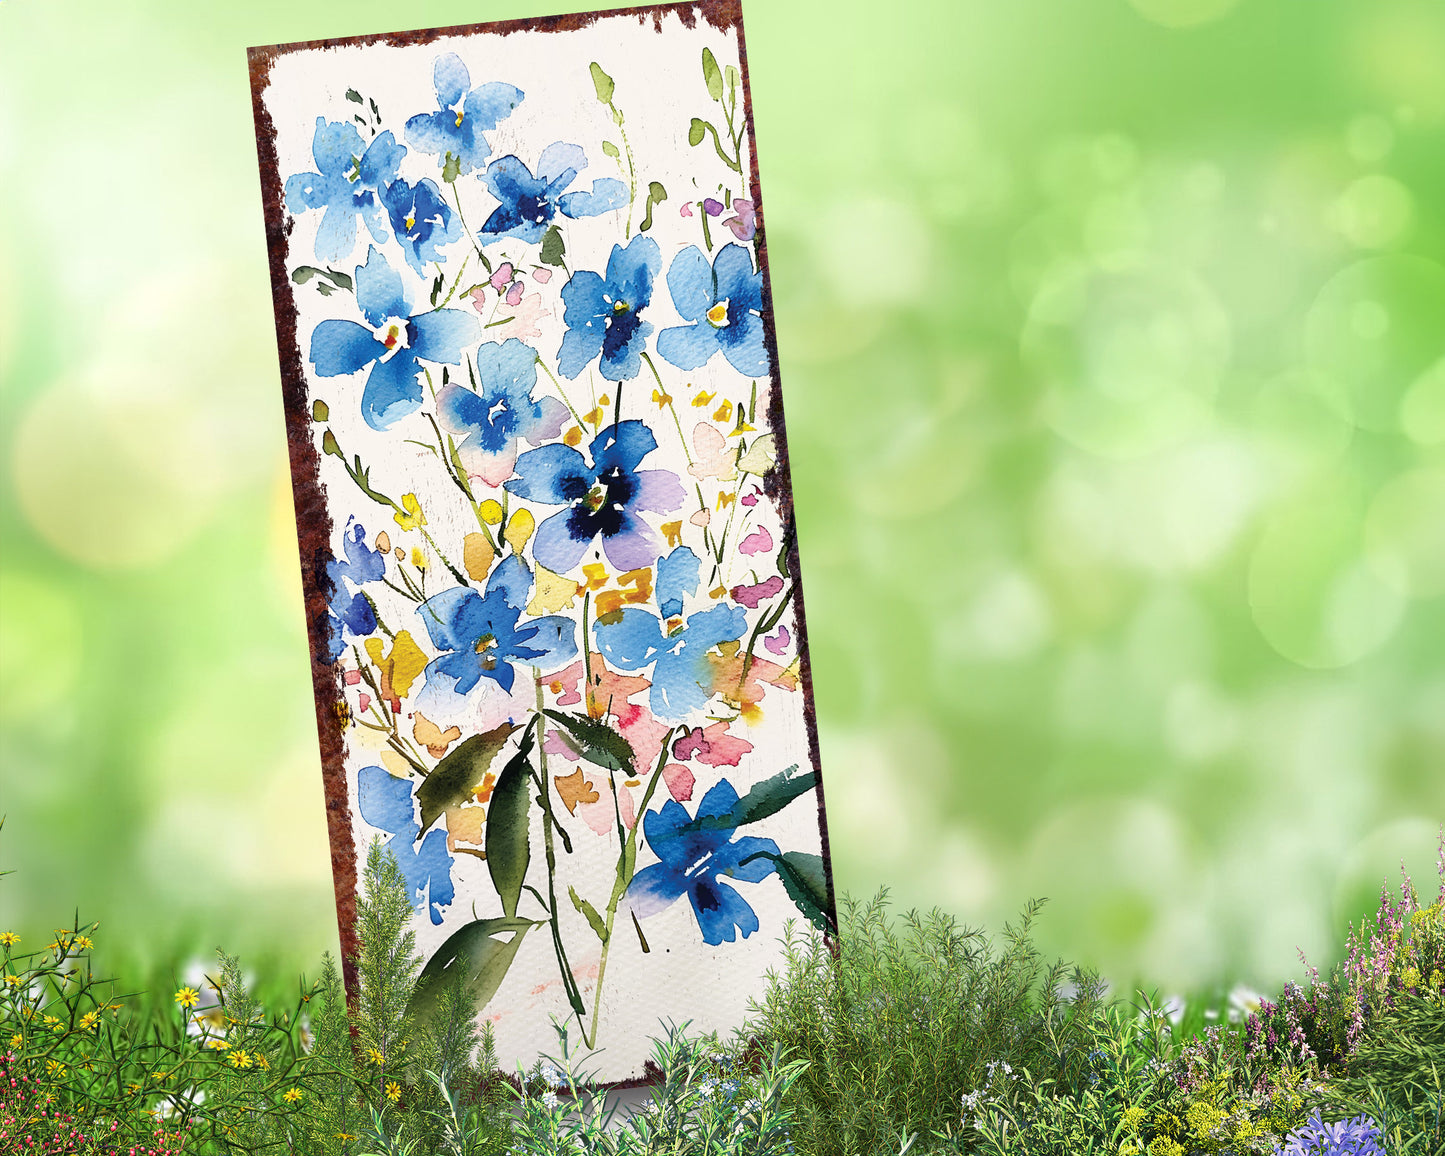 26in Spring Garden Stake | Forget Me Nots Watercolor Floral Decor | Ideal for Outdoor Decor, Yard Art, and Garden Decorations